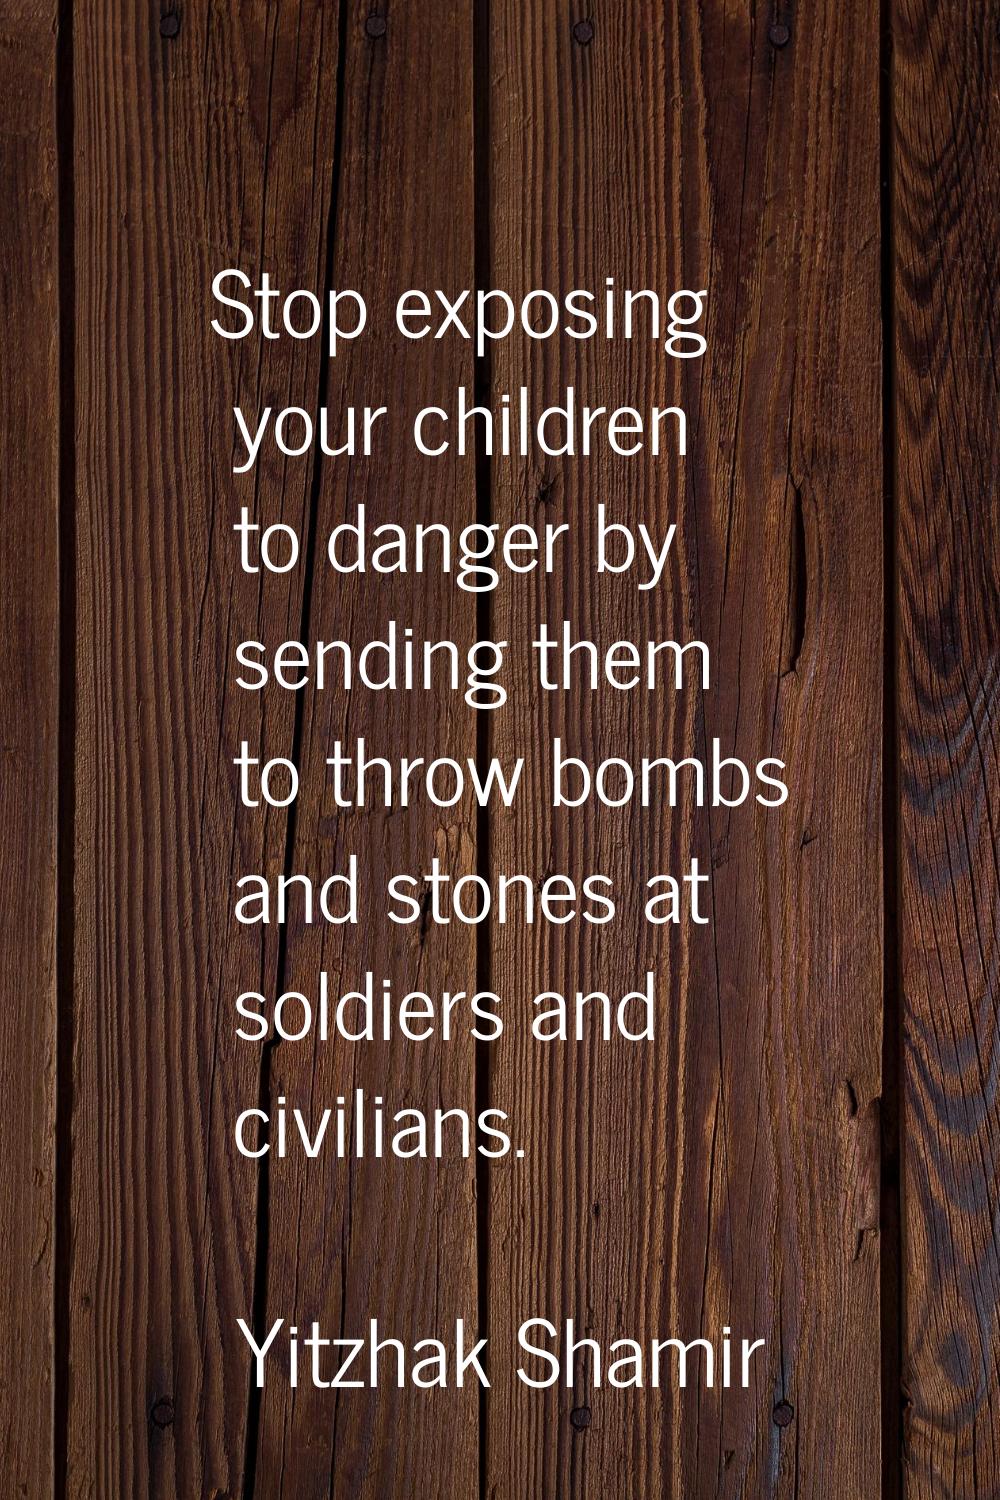 Stop exposing your children to danger by sending them to throw bombs and stones at soldiers and civ